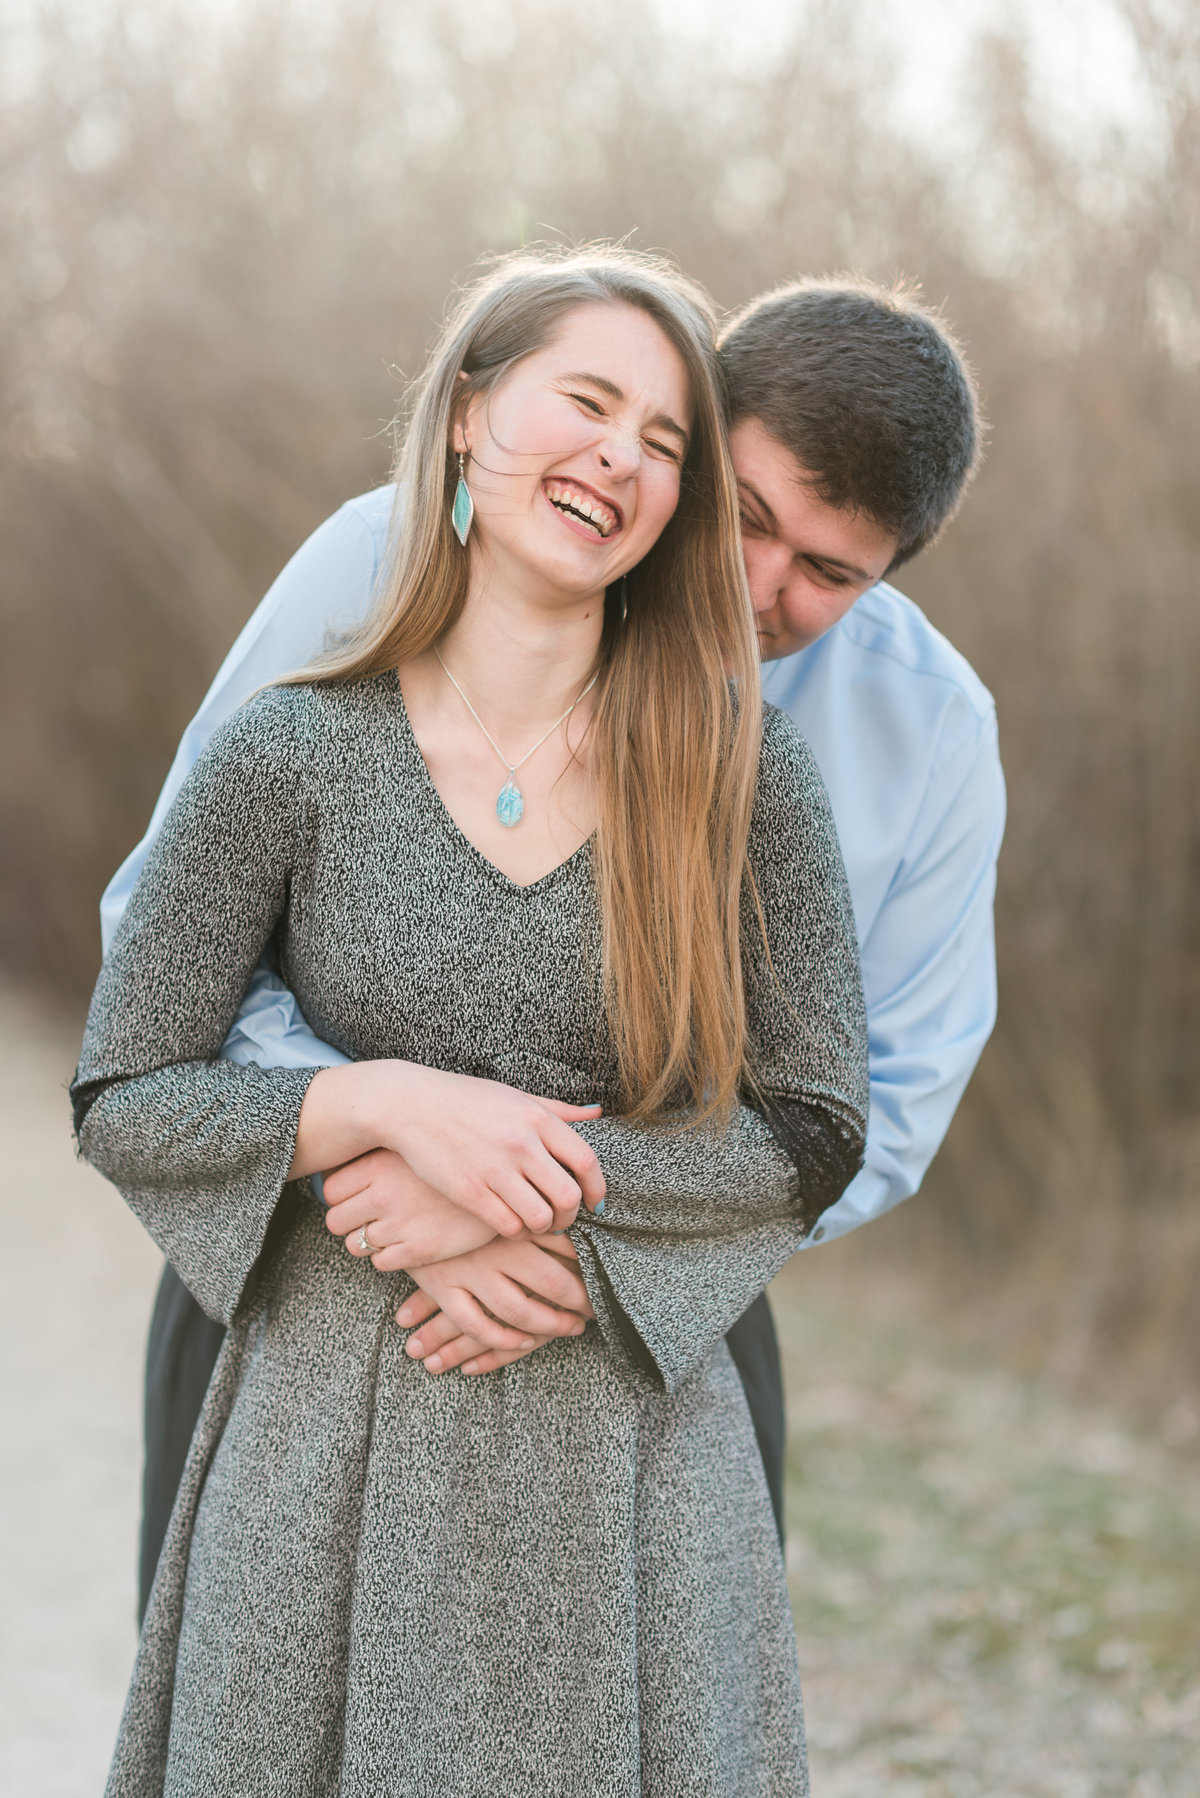 20190302 - Jannae and Forest Engagement Session 091-Edit - A Winter Reid Merrill Park Engagement Session